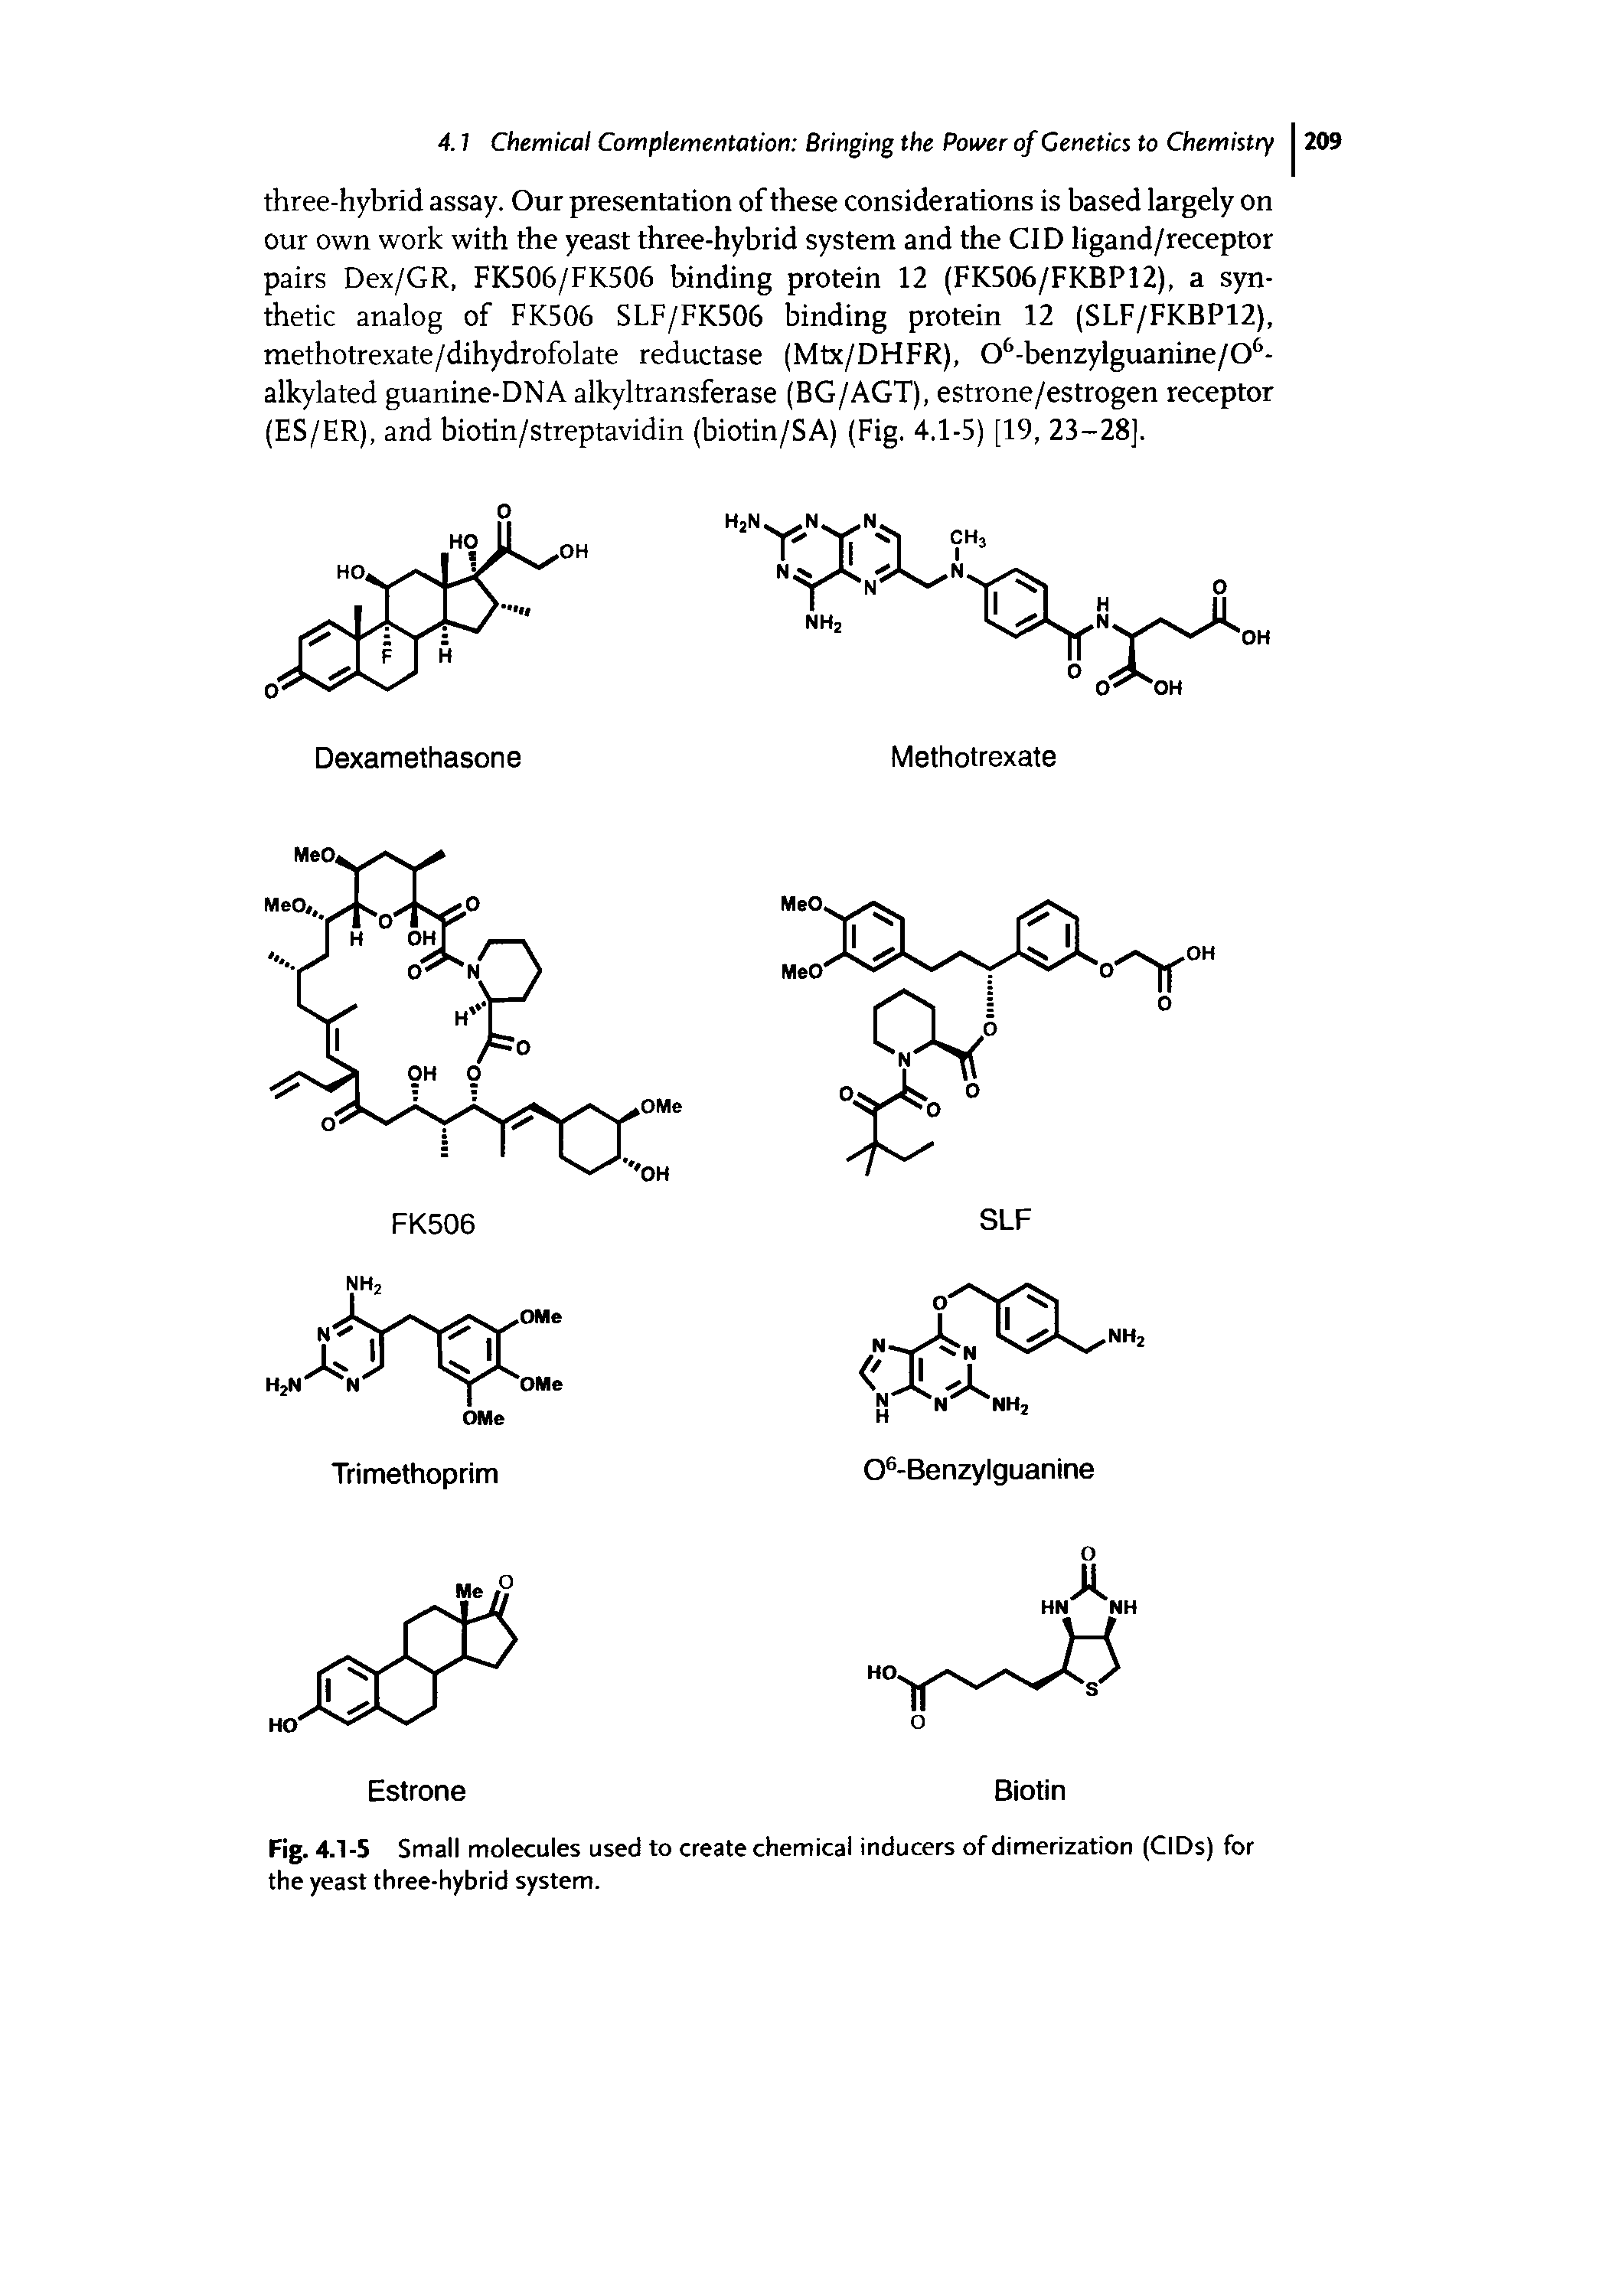 Fig. 4.1-5 Small molecules used to create chemical inducers of dimerization (Cl Ds) for the yeast three-hybrid system.